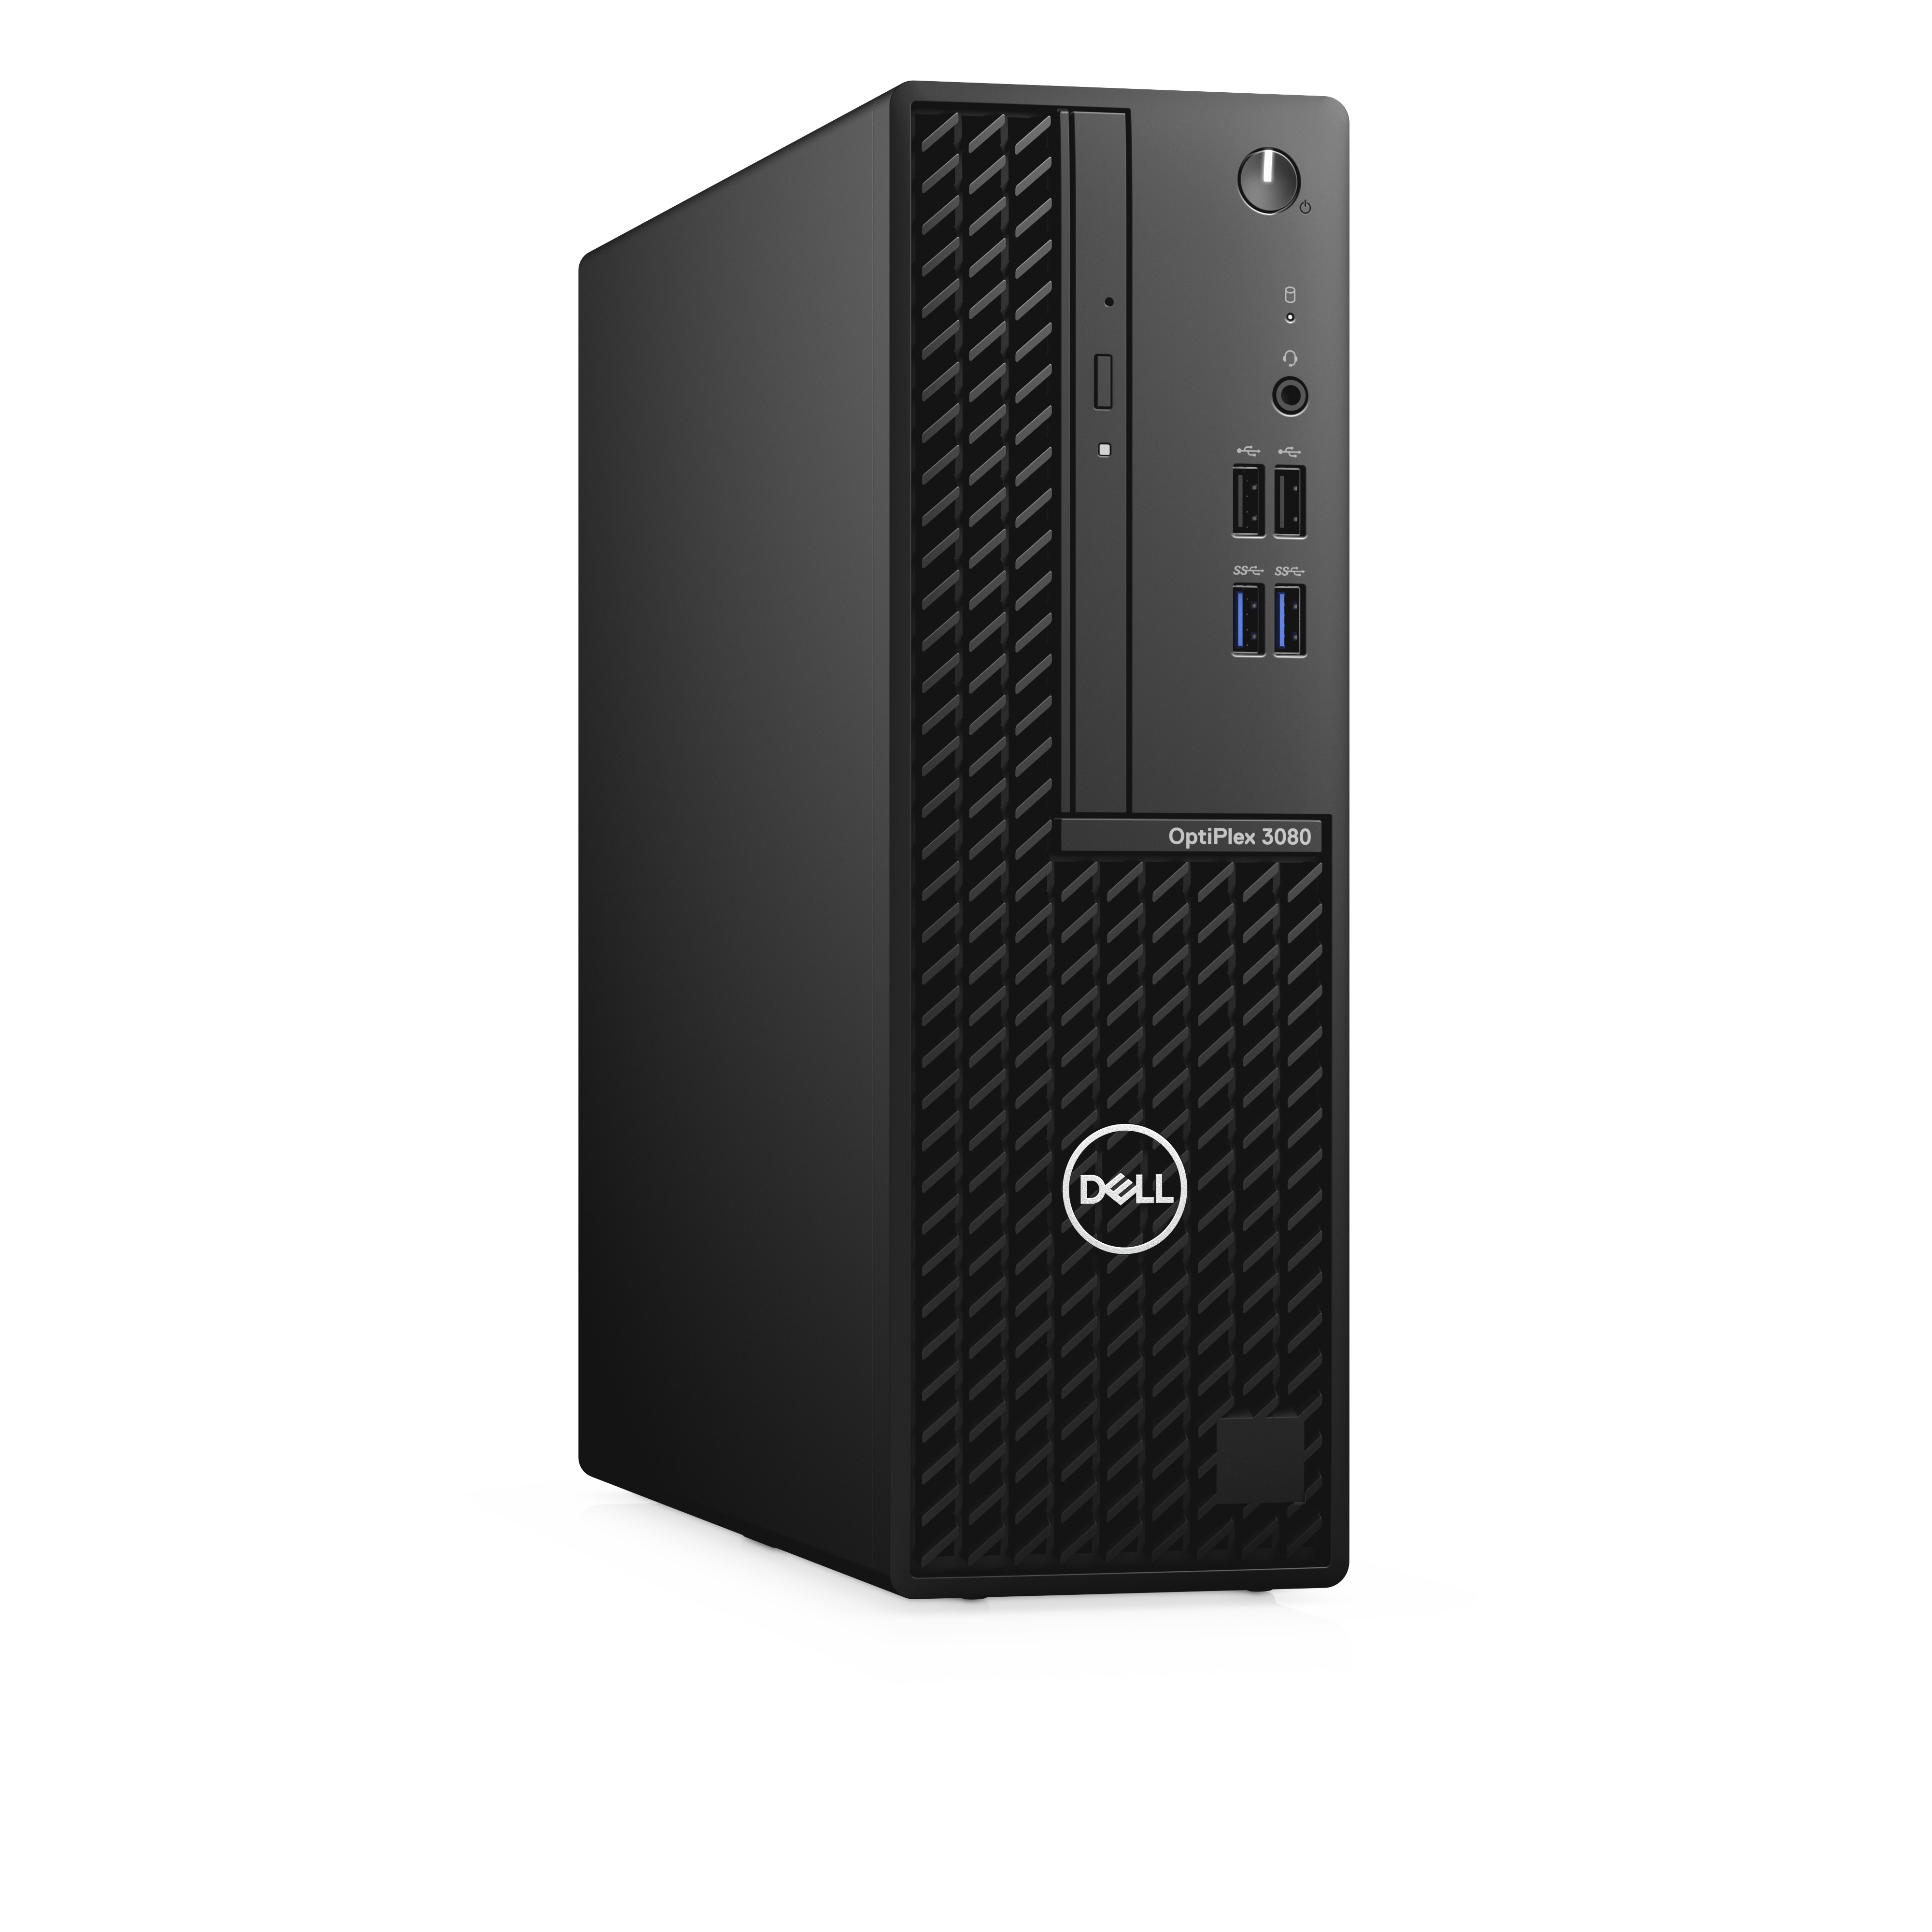 Optiplex 3080 Sff Core I5 10505 / 3.2 Ghz Ram 8 Gb Ssd 256 Gb Nvme, Class 35 Dvd-writer Uhd Graphics 630 Gige Win 10 Pro Monitor: None Keyboard: English Black Bts With 3 - image 3 of 4